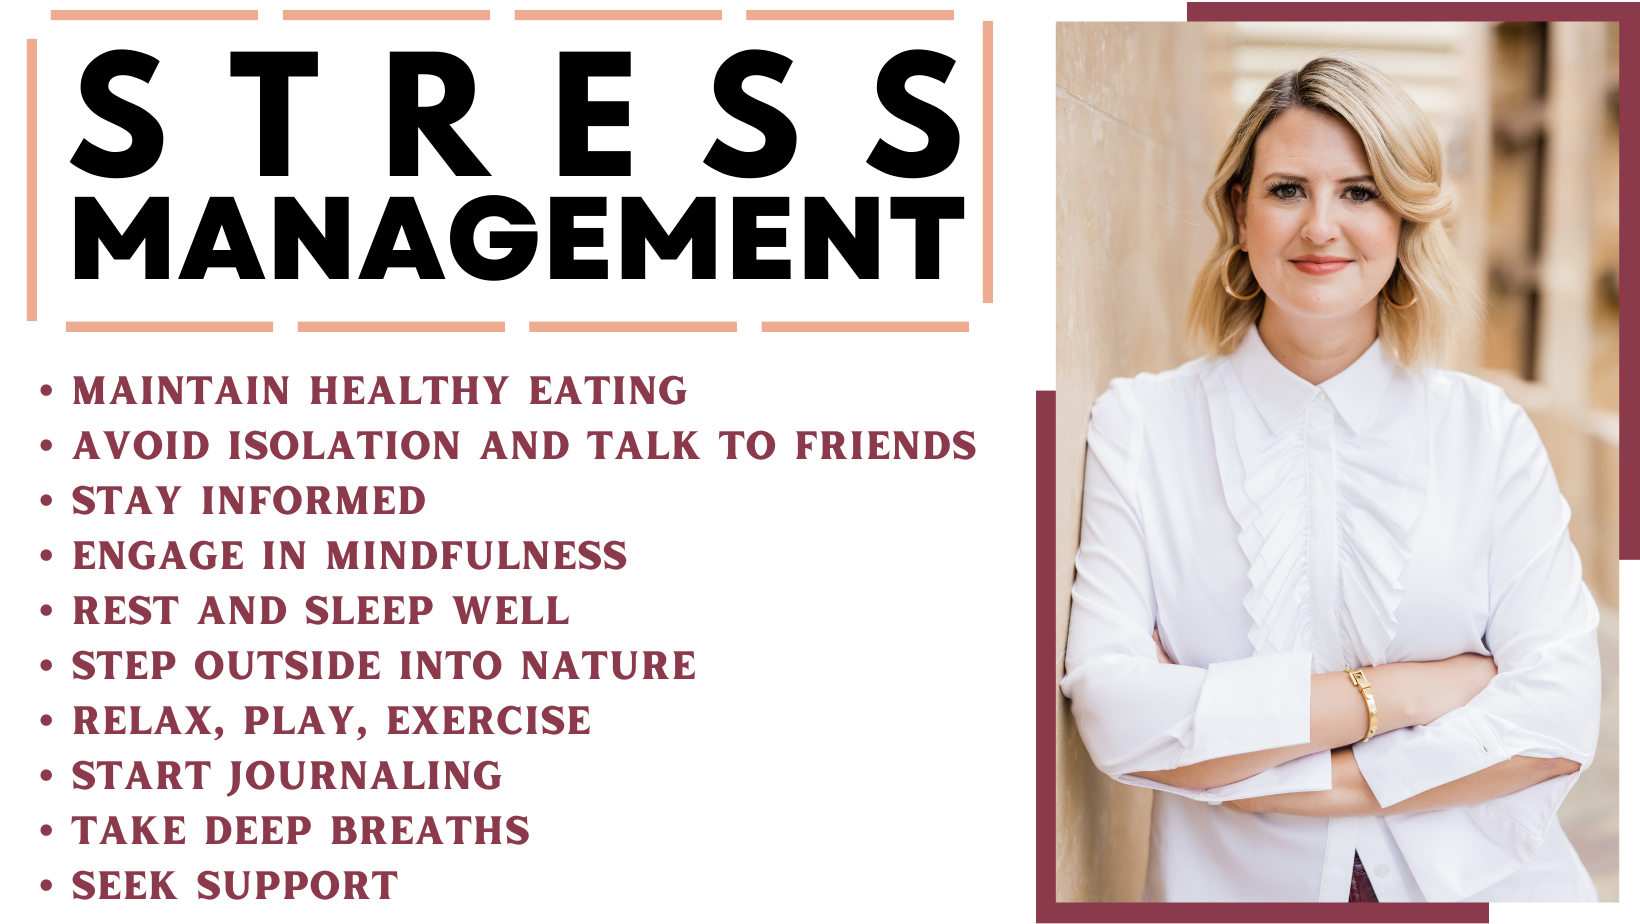 Stress Management - Reduce and Relieve Stress - Hyderabad